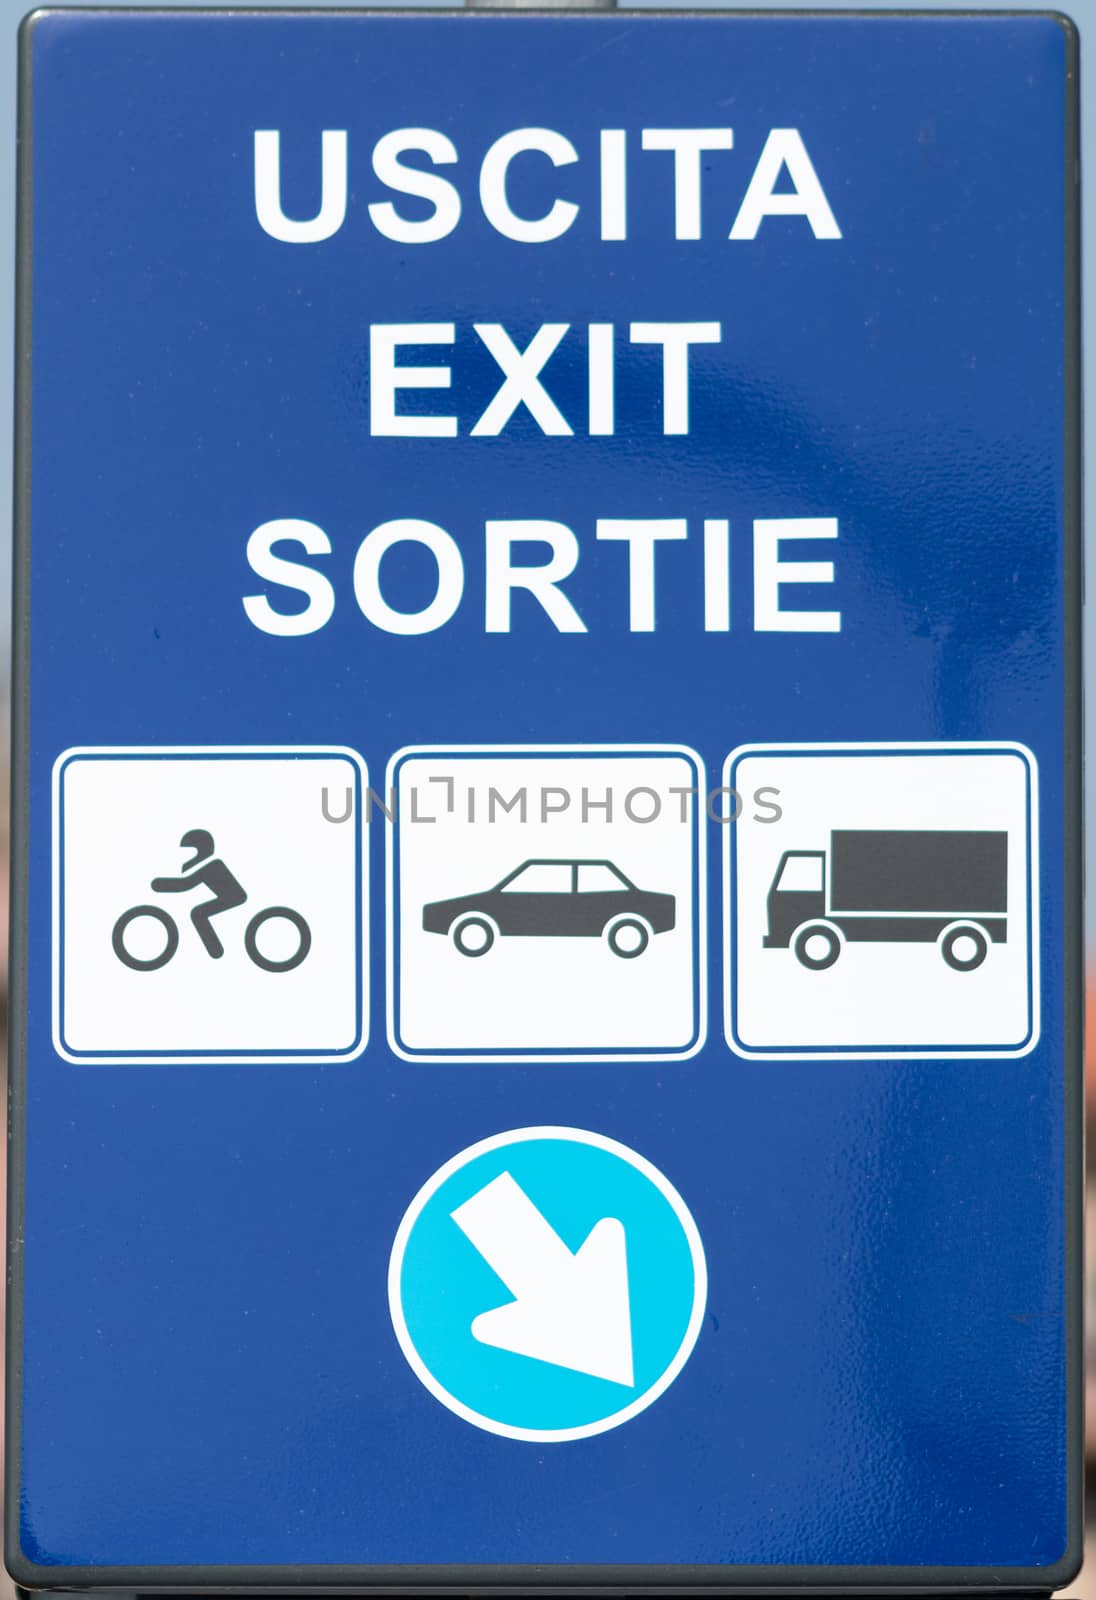 Metal sign with directions and instructions in Italian